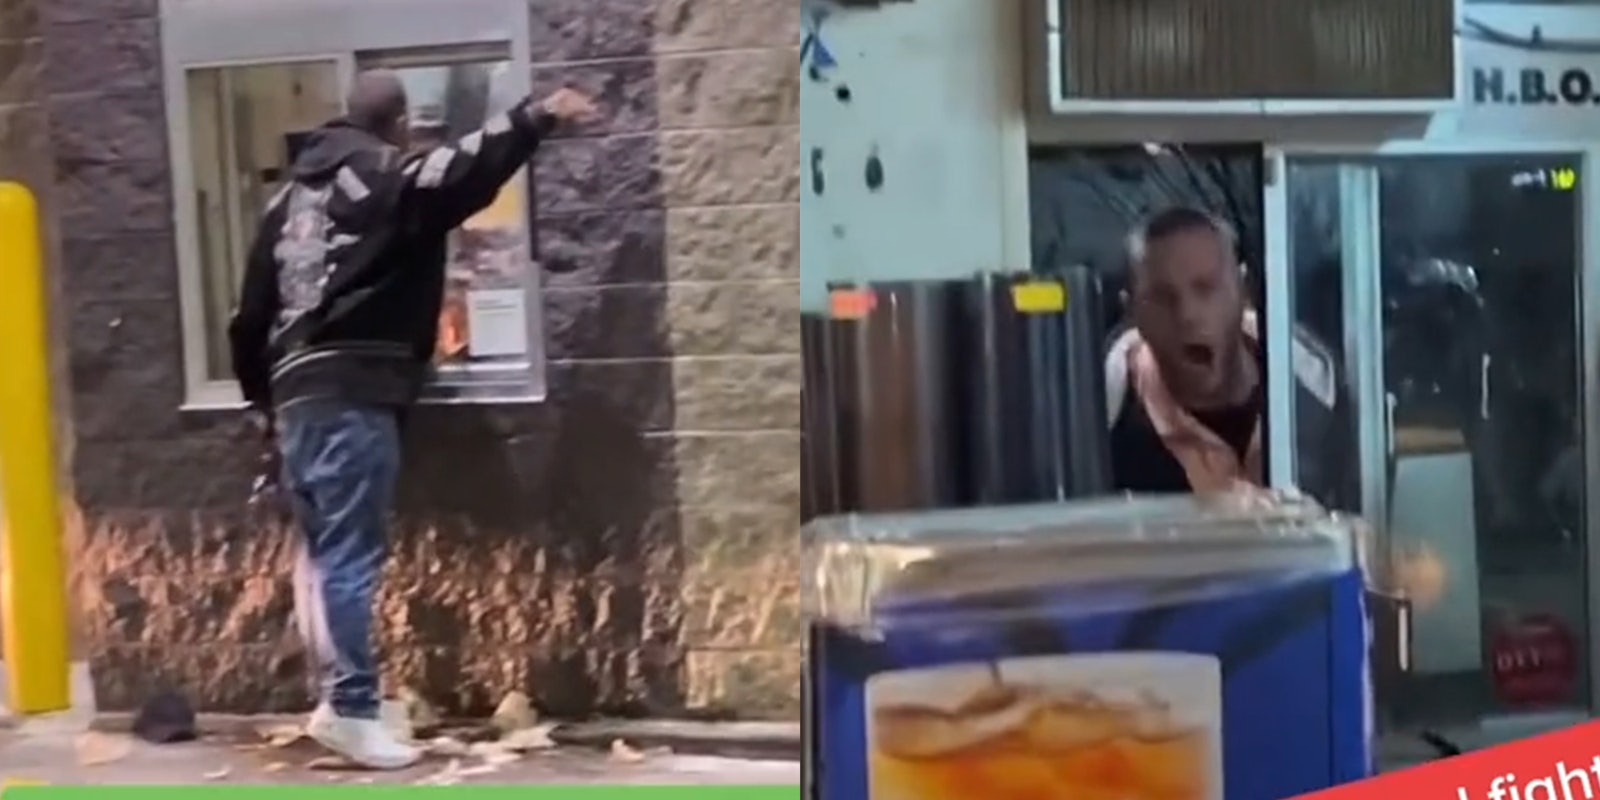 man punching drive thru window and pointing (l) man pushing face through drive-in window while yelling (r)